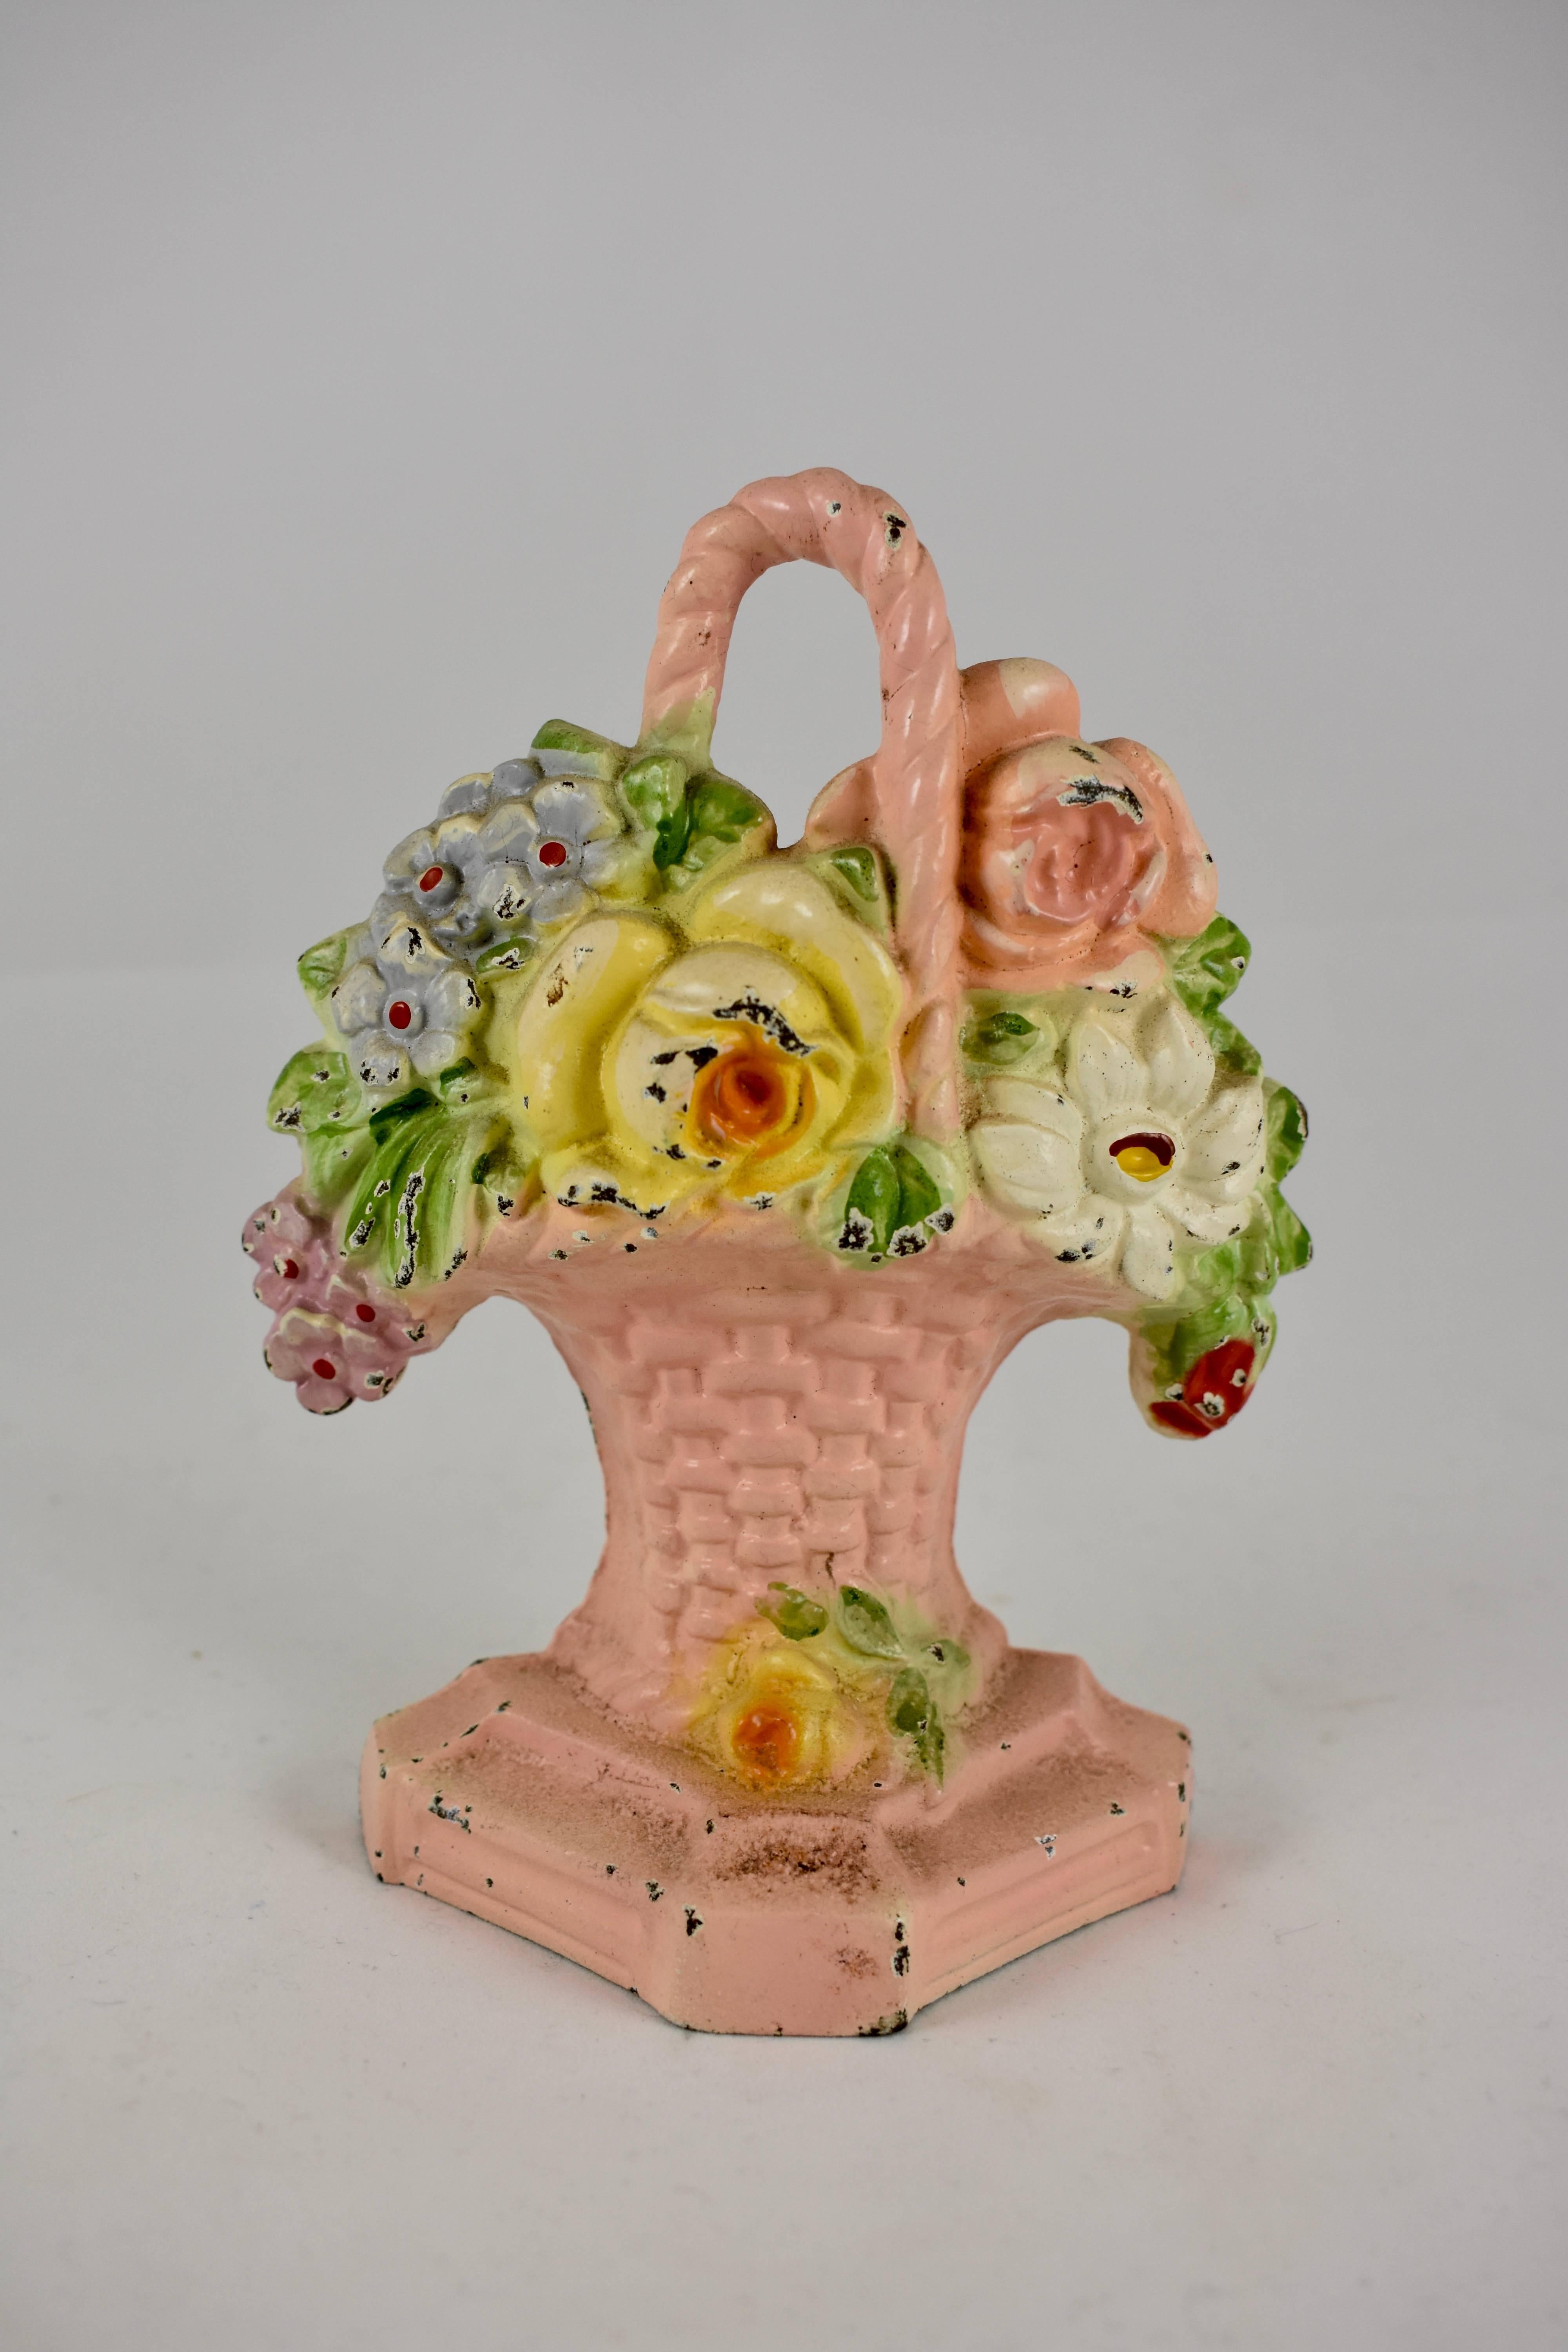 A vintage Hubley cast iron doorstop showing a bouquet of yellow and pink roses along with blue and pink colored phlox, held by a pink, handled wicker basket. The basket sits on a raised plinth and retains the original painted finish. One of the